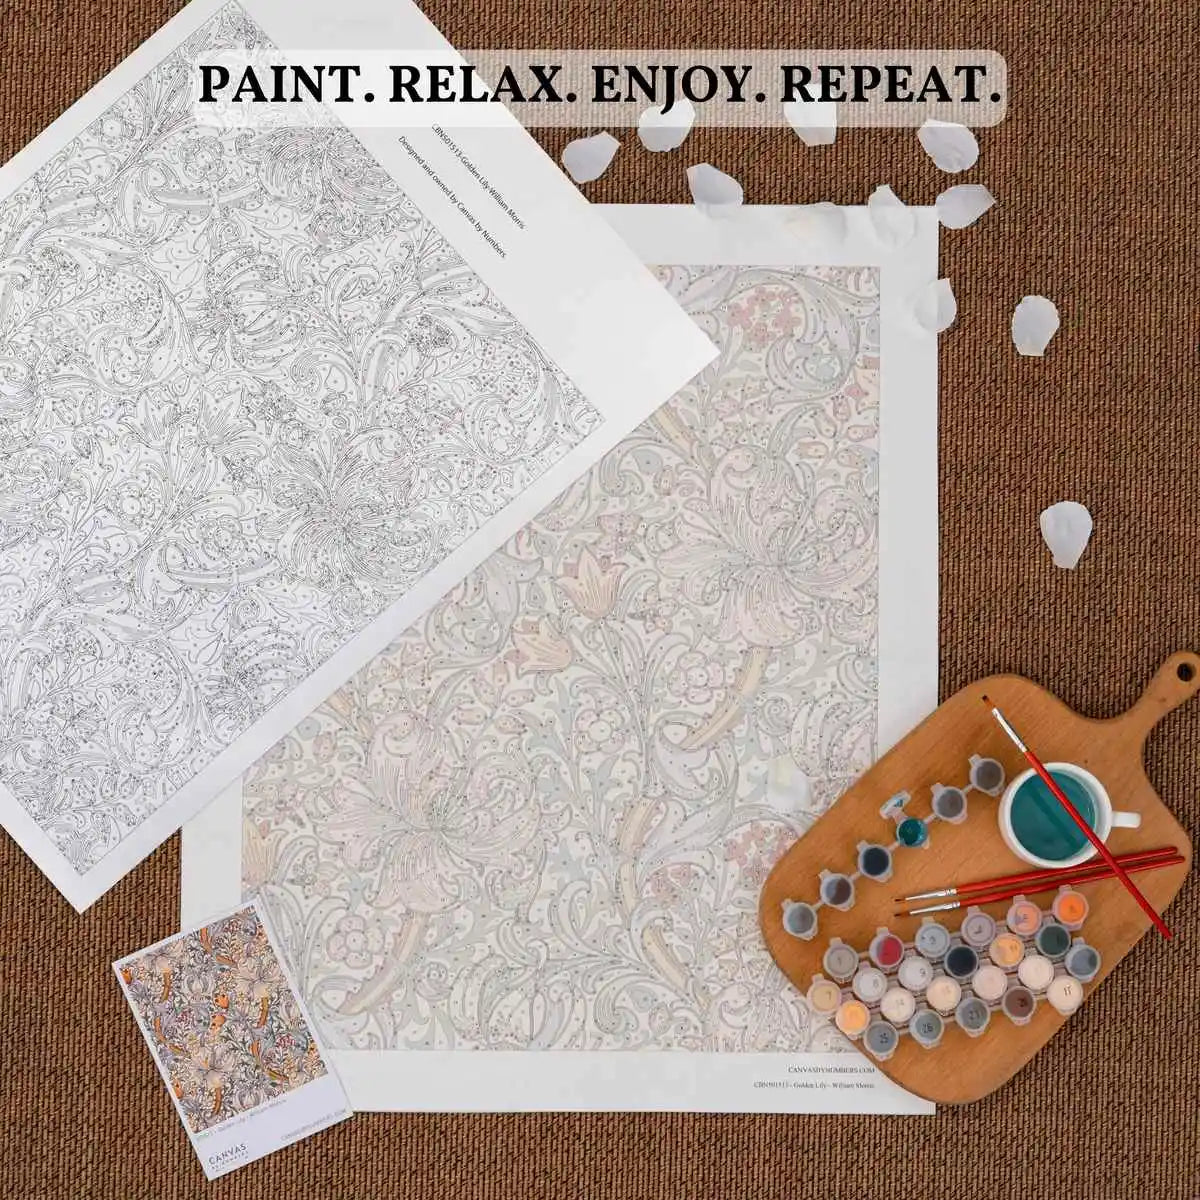 Alice Entering Wonderland - Paint by Numbers-Follow Alice down the rabbit hole and explore a fantastical world of color and whimsy. This Paint by Numbers kit will take you on an enchanting journey.-Canvas by Numbers